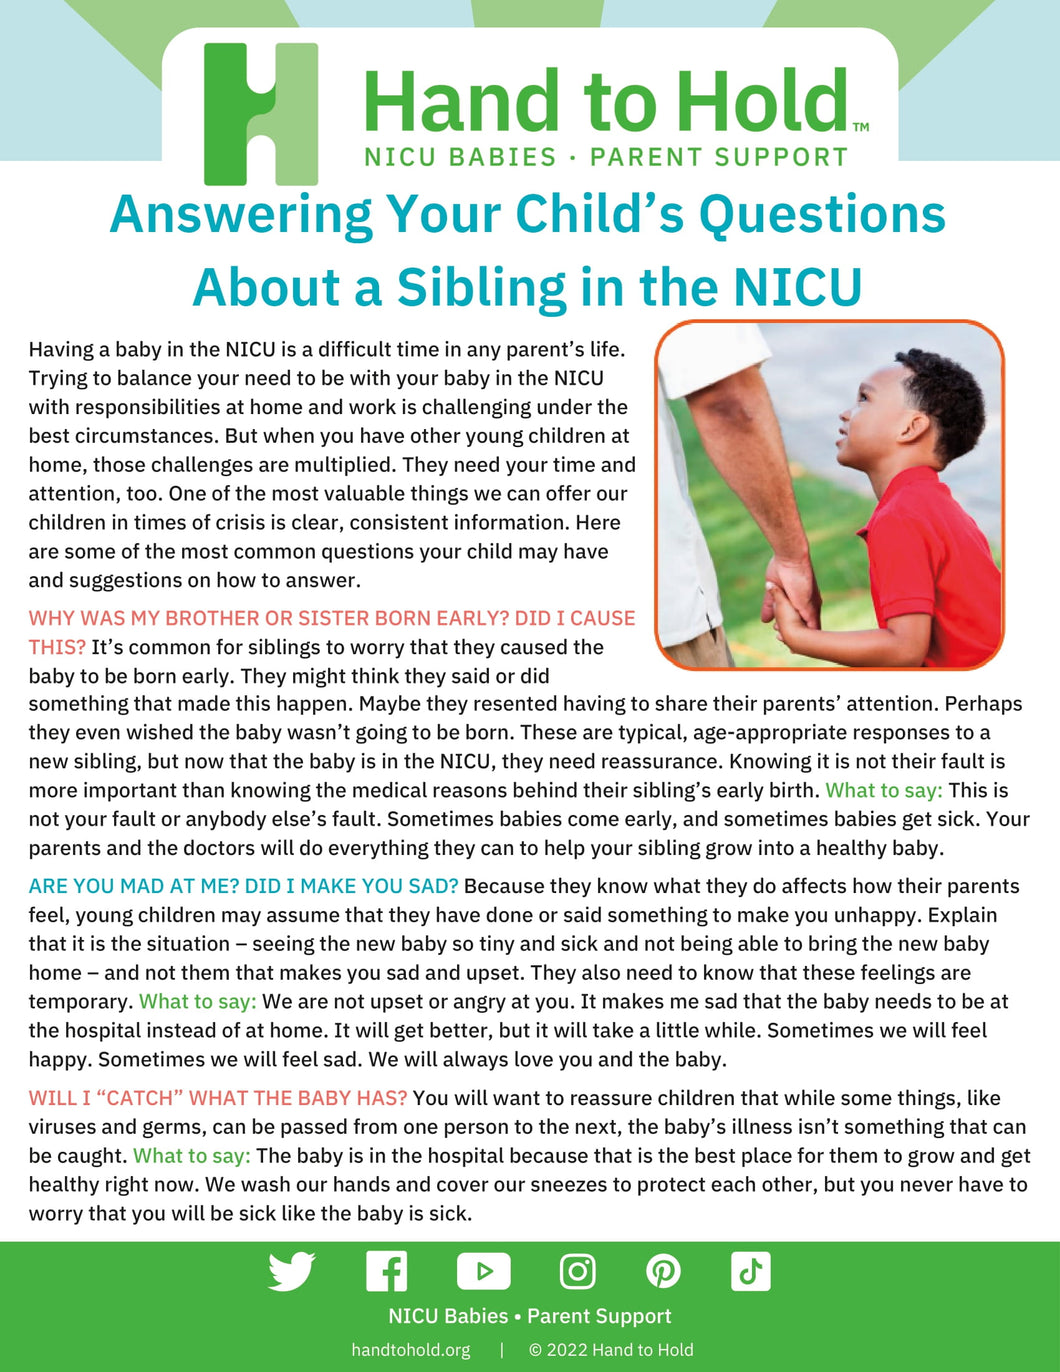 Answering Your Child's Questions About a Sibling in the NICU